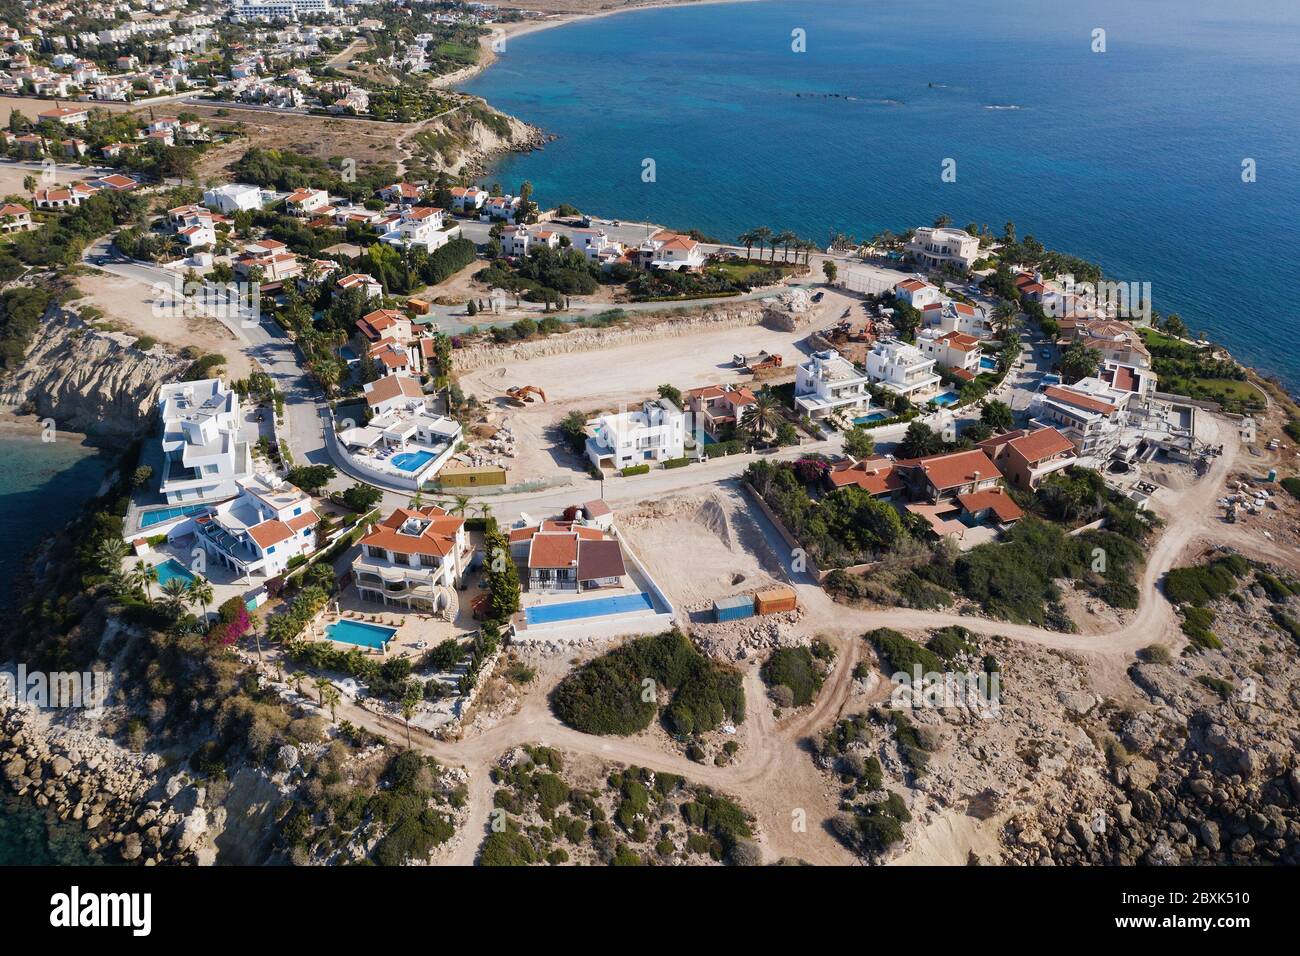 Cyprus, villas buildings on cliff for resort near Paphos city, aerial view. Stock Photo